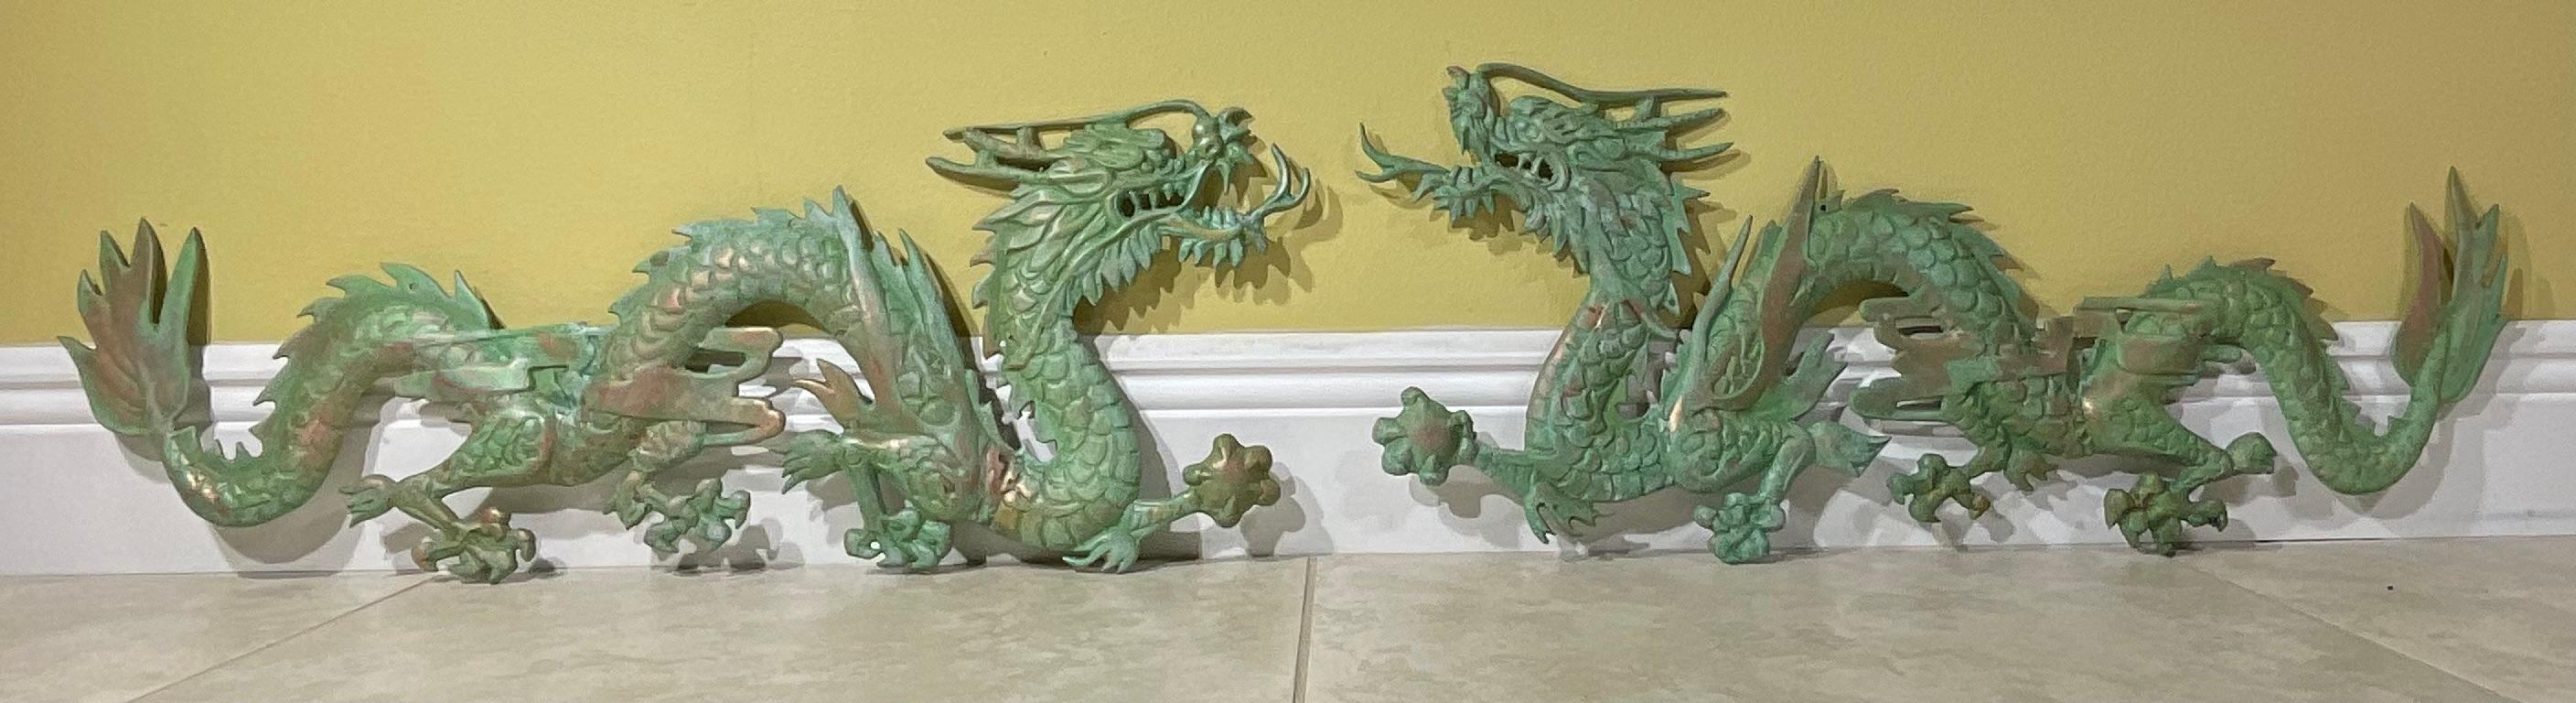 Pair of Vintage Brass Chinese Dragon  Wall Hanging For Sale 6